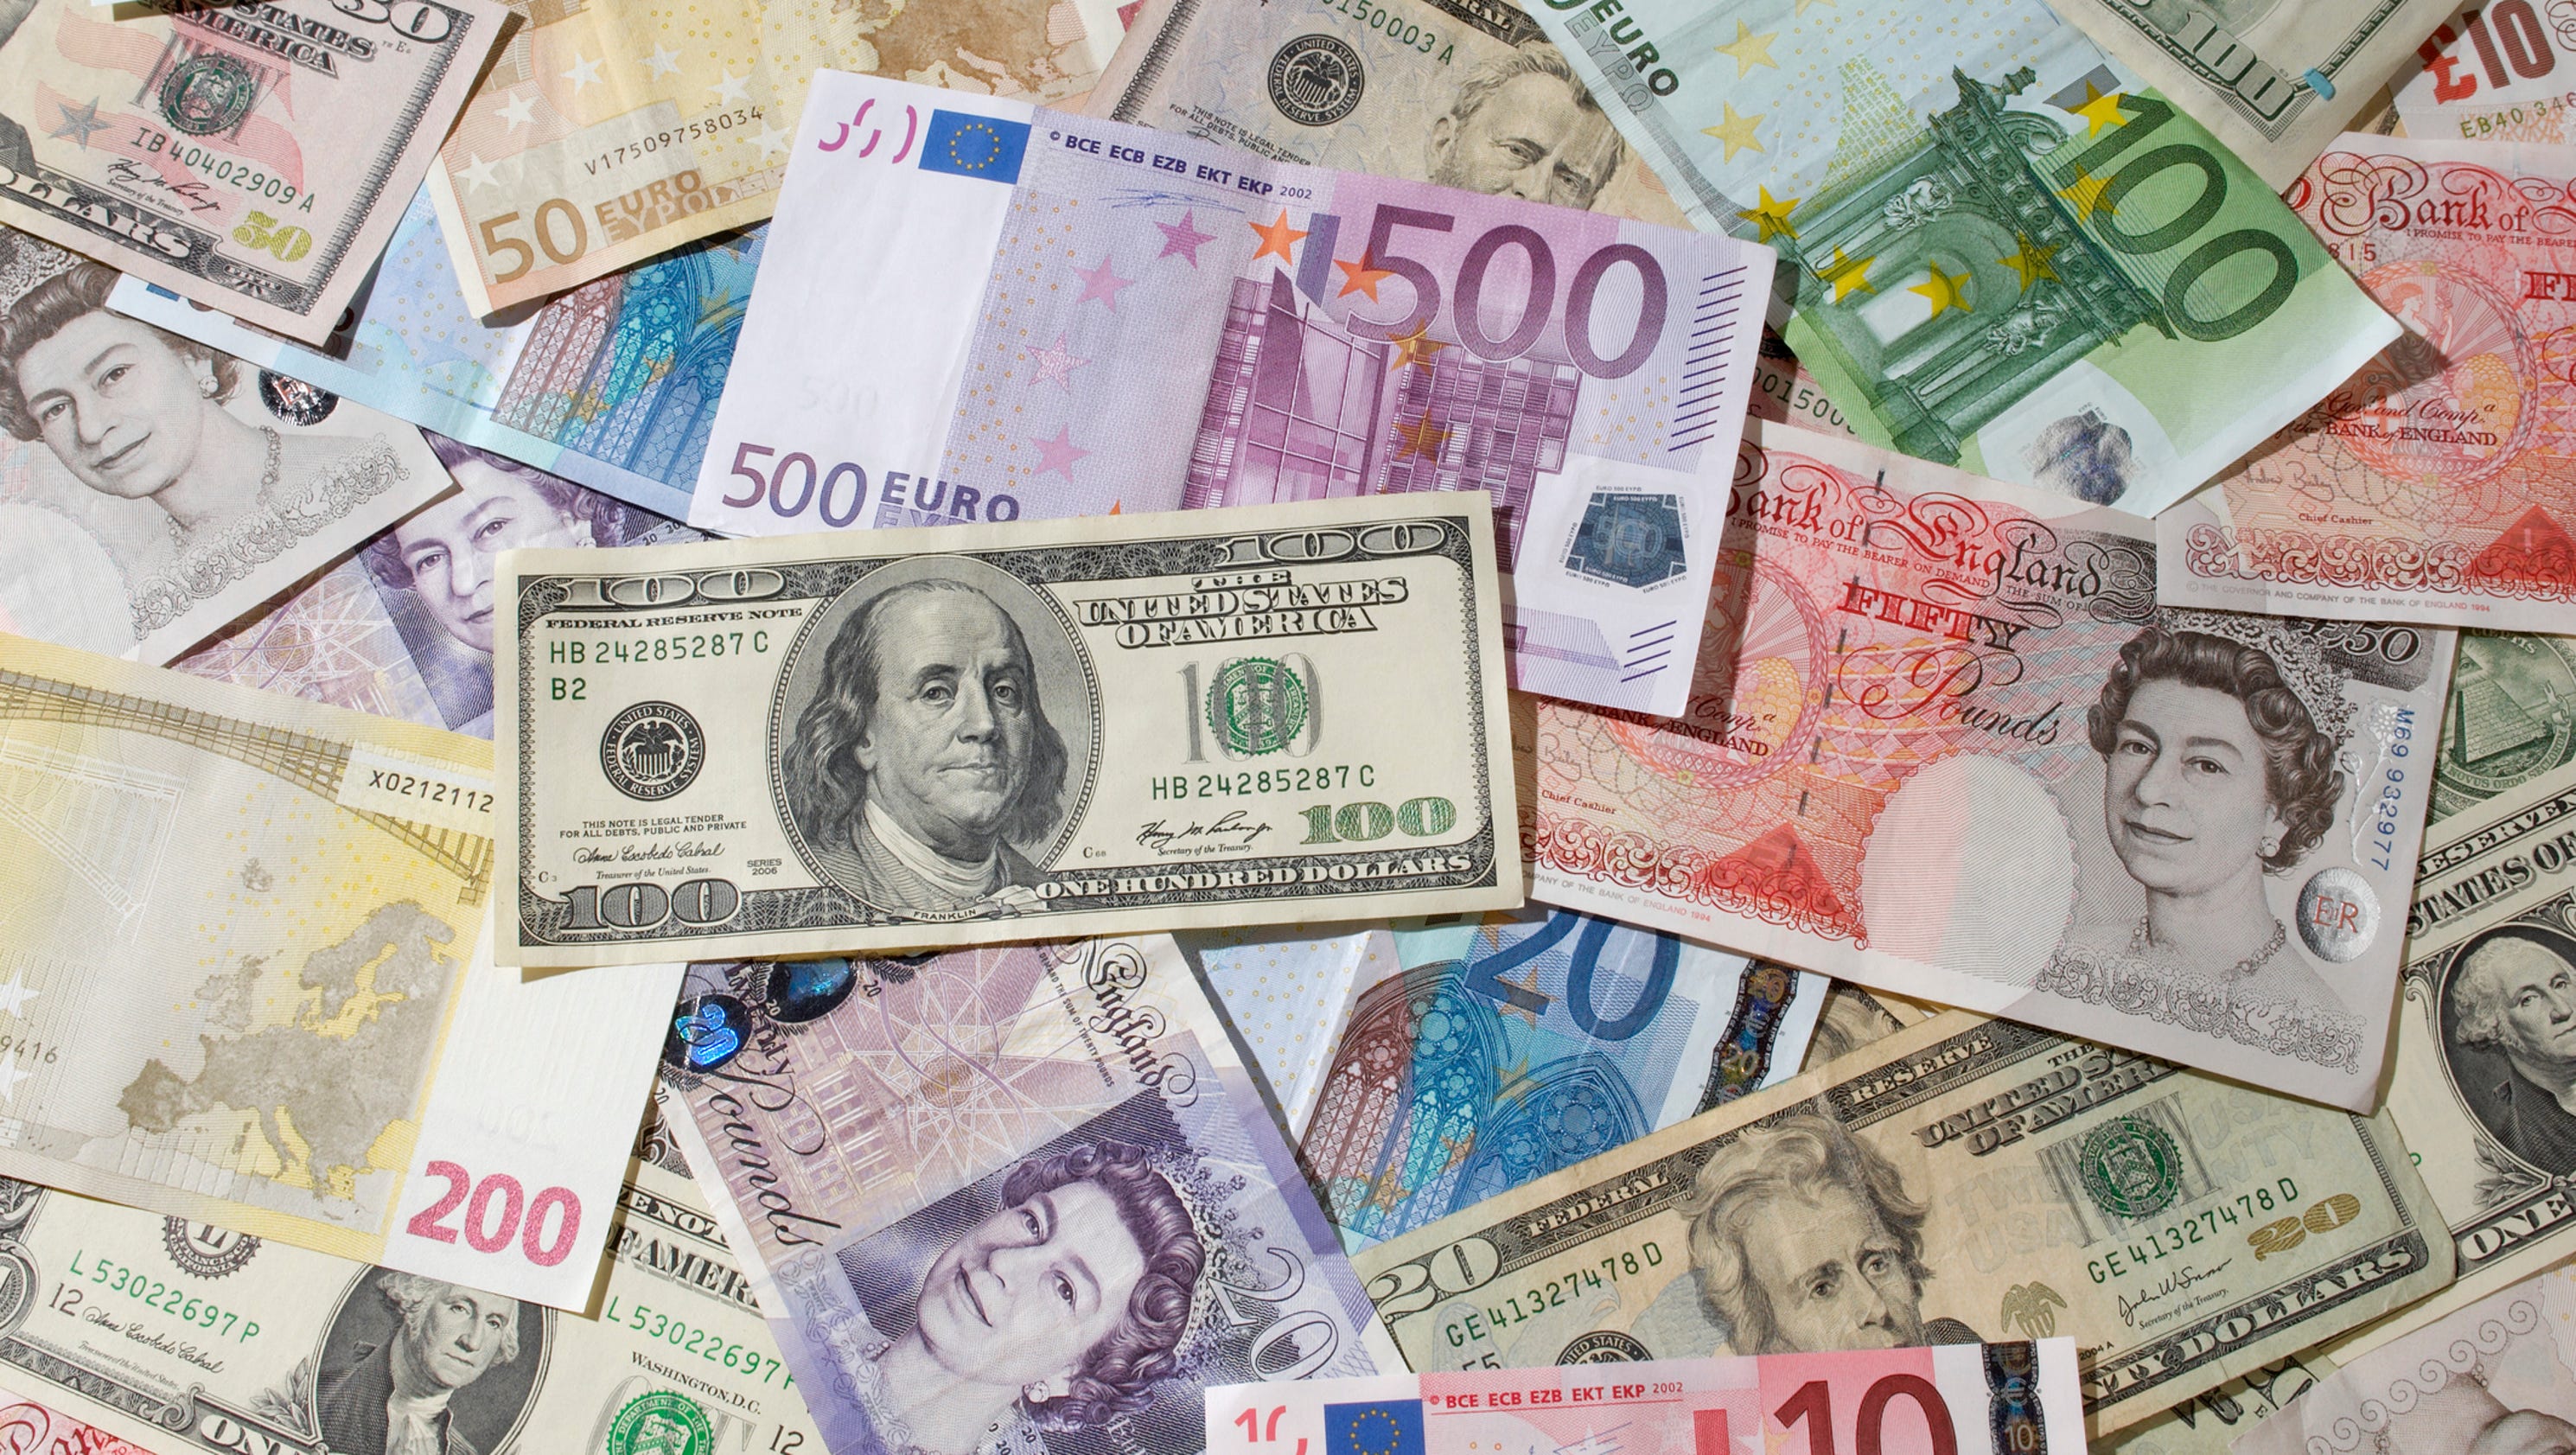 Currency exchange 101: What to know before you go